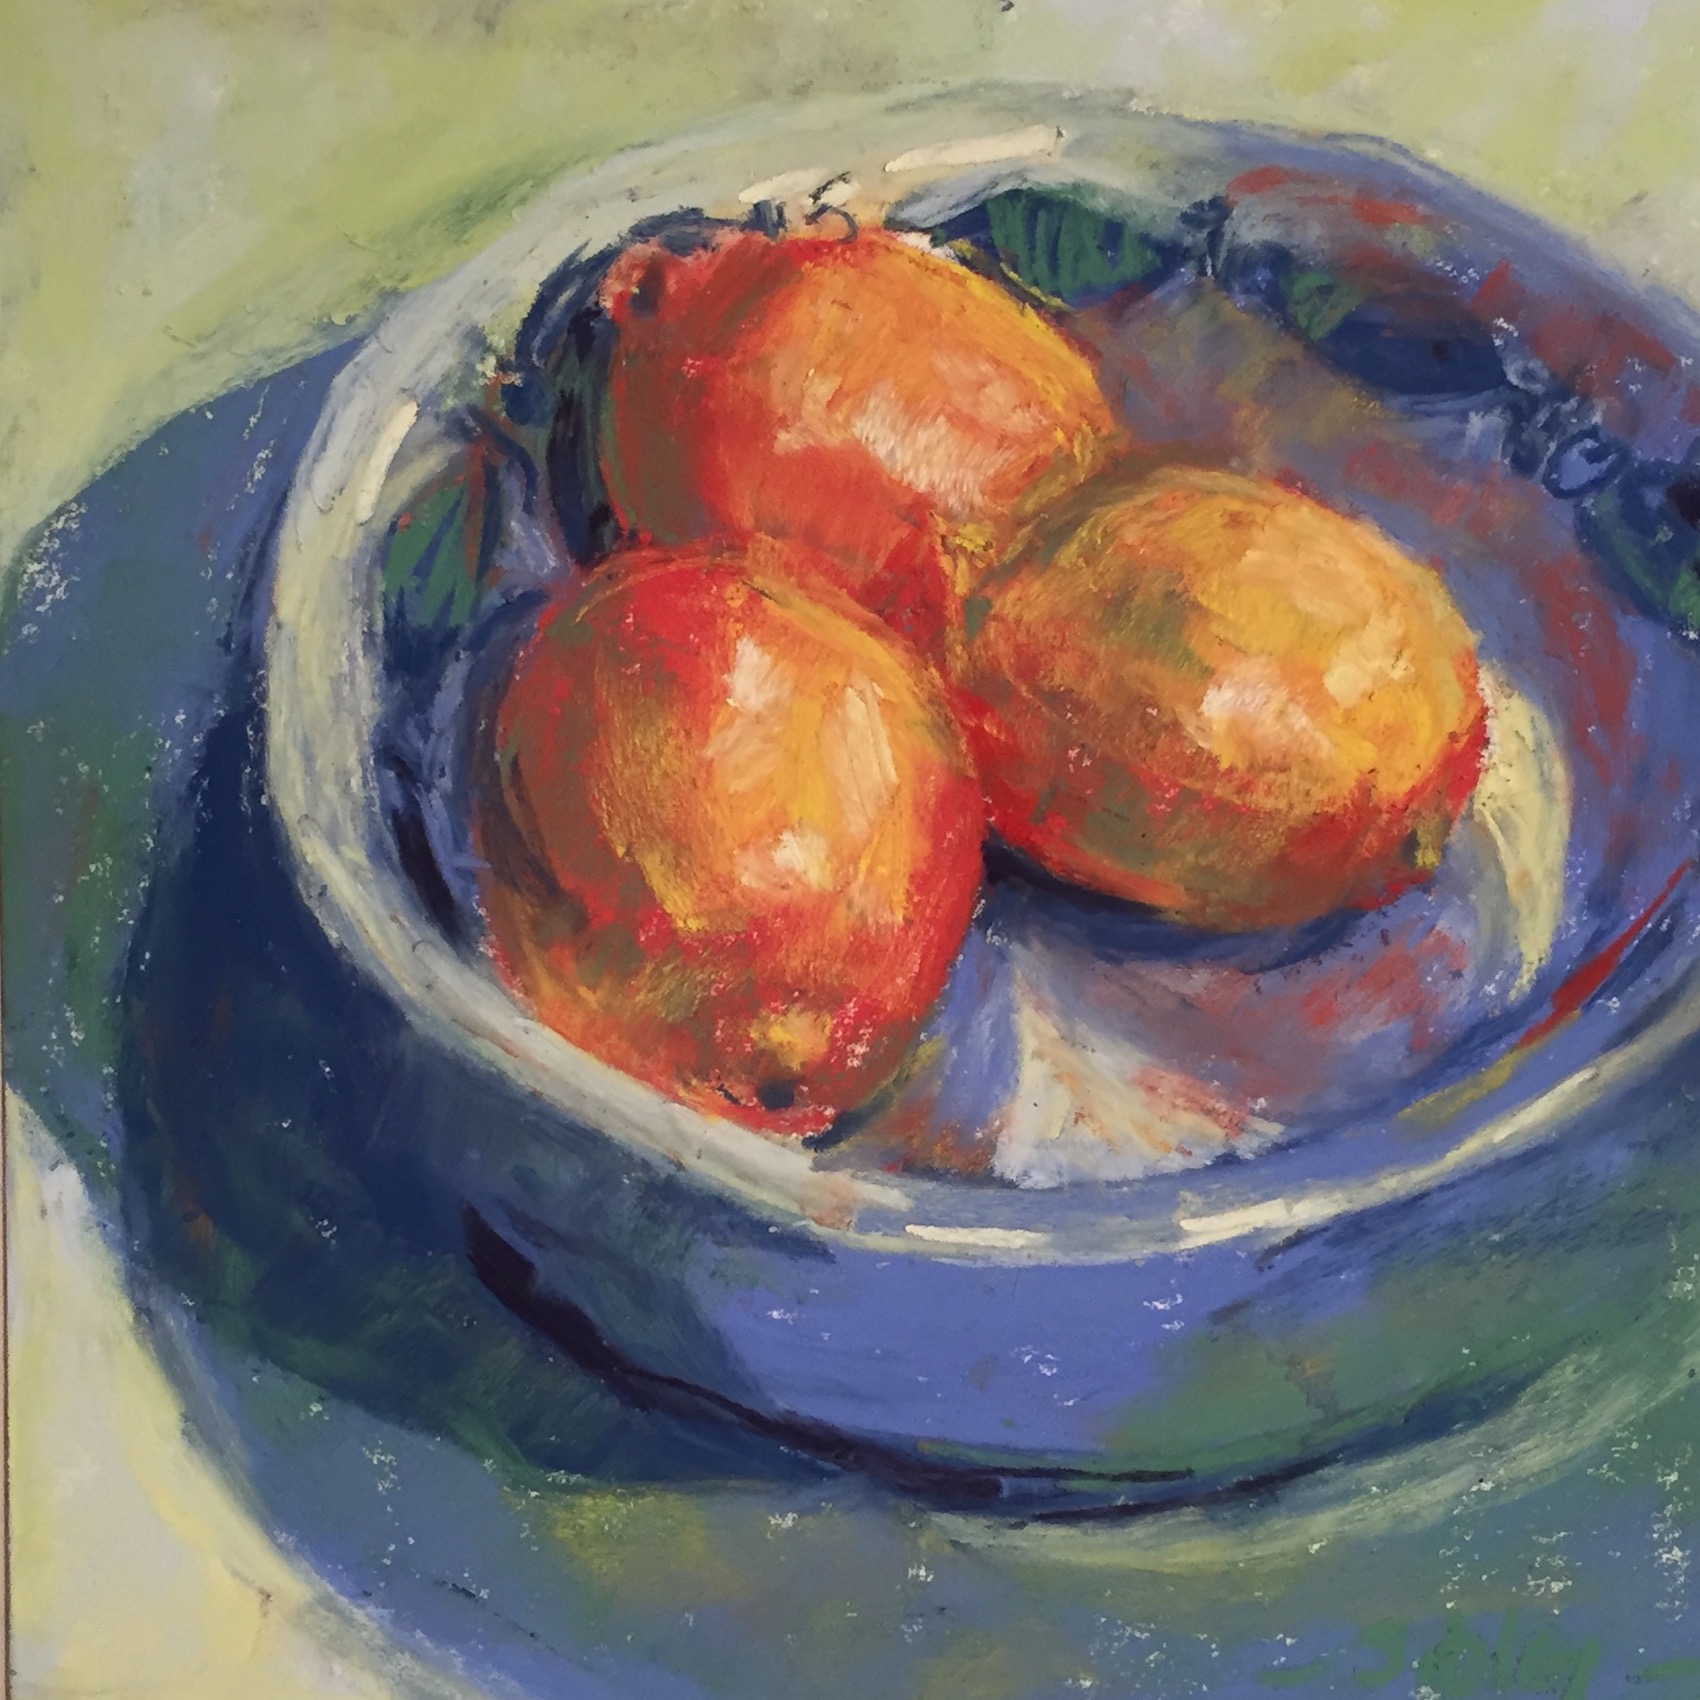 small box of pastels: Gail Sibley, "She Loved Lemons," Unison pastels on Pastel Premier paper (white), 8 x 8 in. SOLD